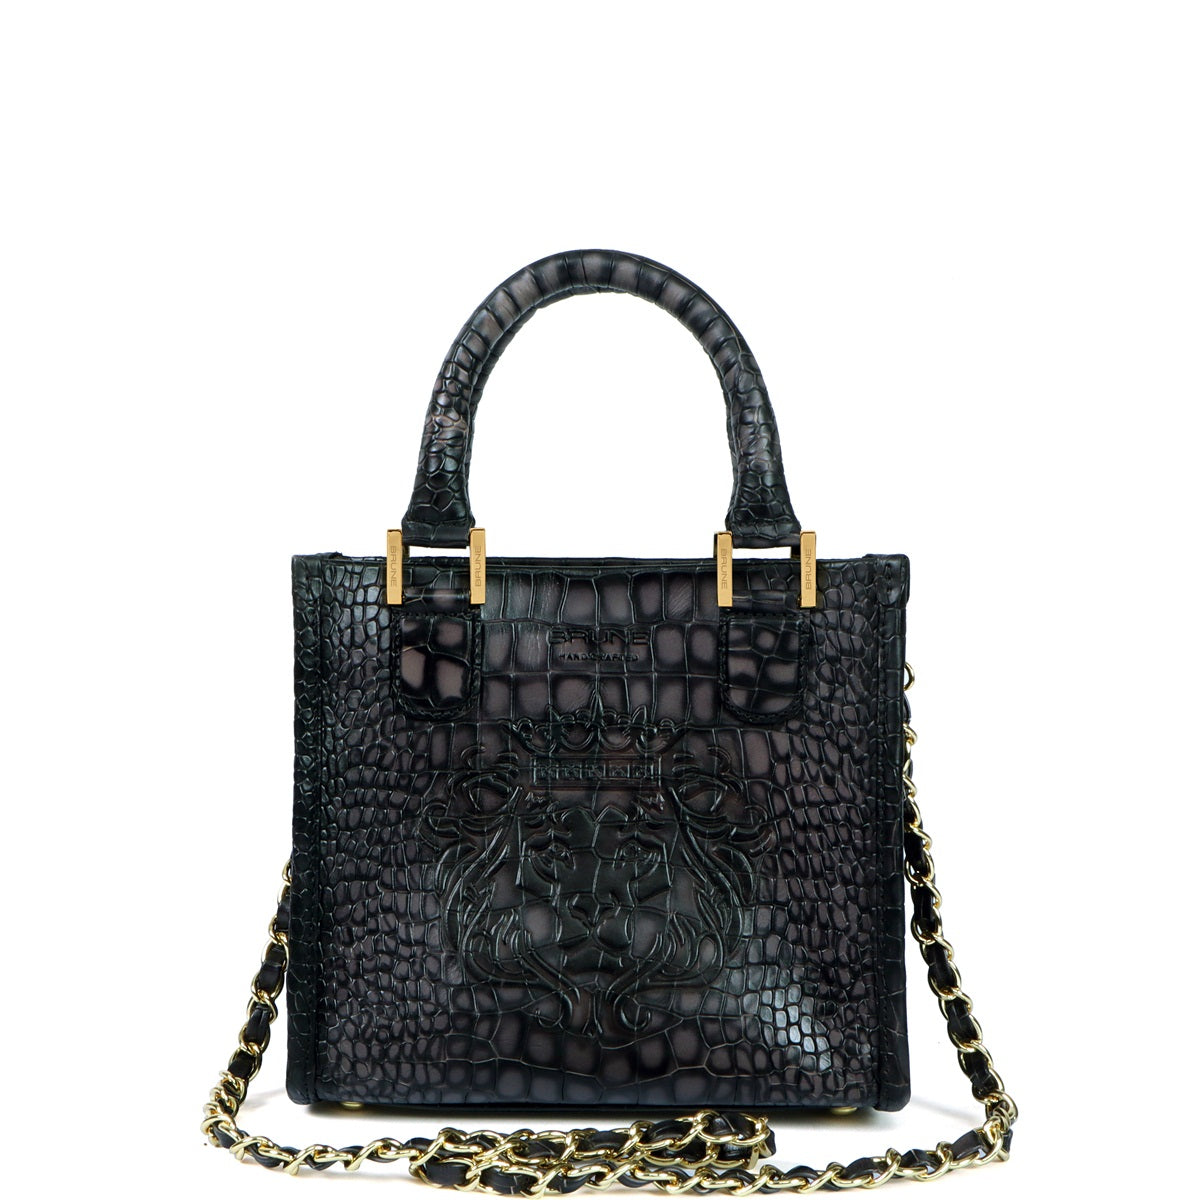 Small Size Hand Bag with Embossed Lion Smoky Grey Croco Deep Cut Textured Leather